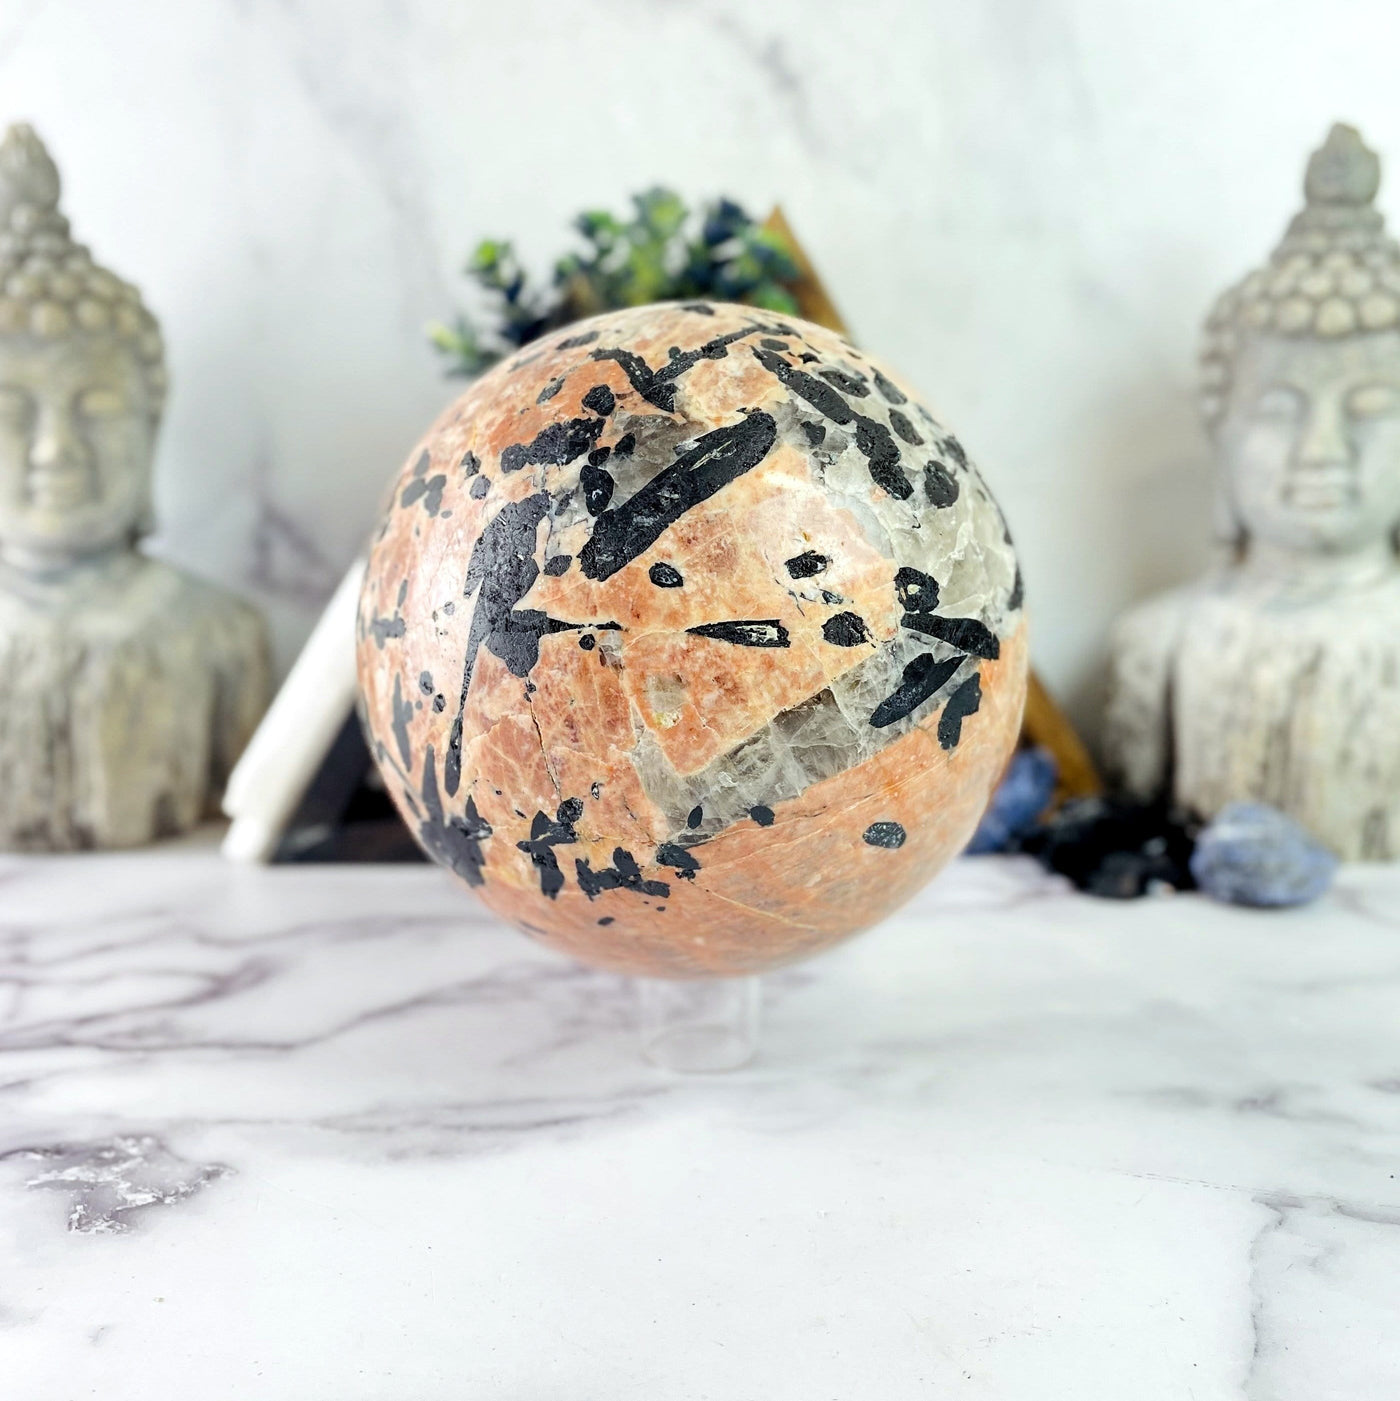 Black Tourmaline with Feldspar sphere with decorations in the background